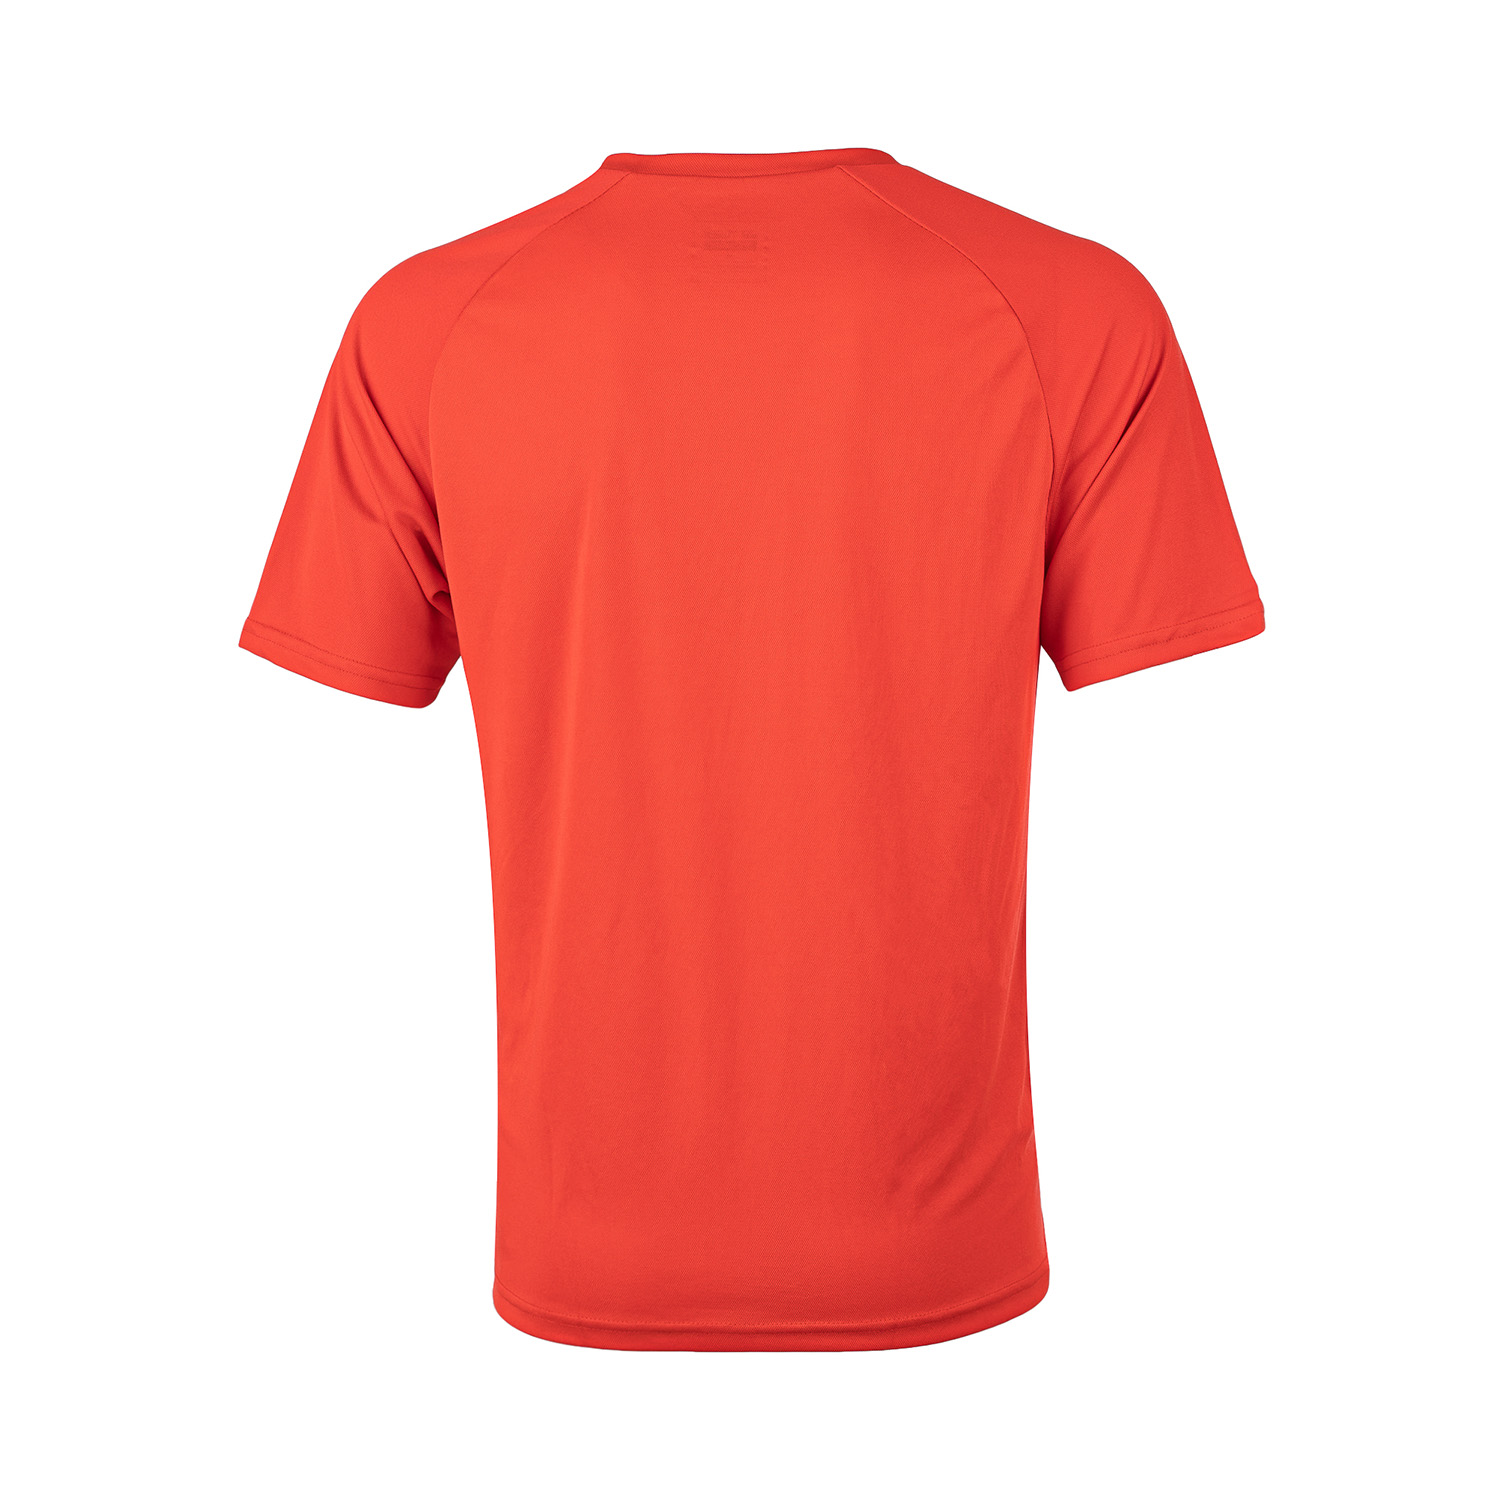 RM-S092-1539-178P-19-S FIERY RED_02 – Vsmash Sports